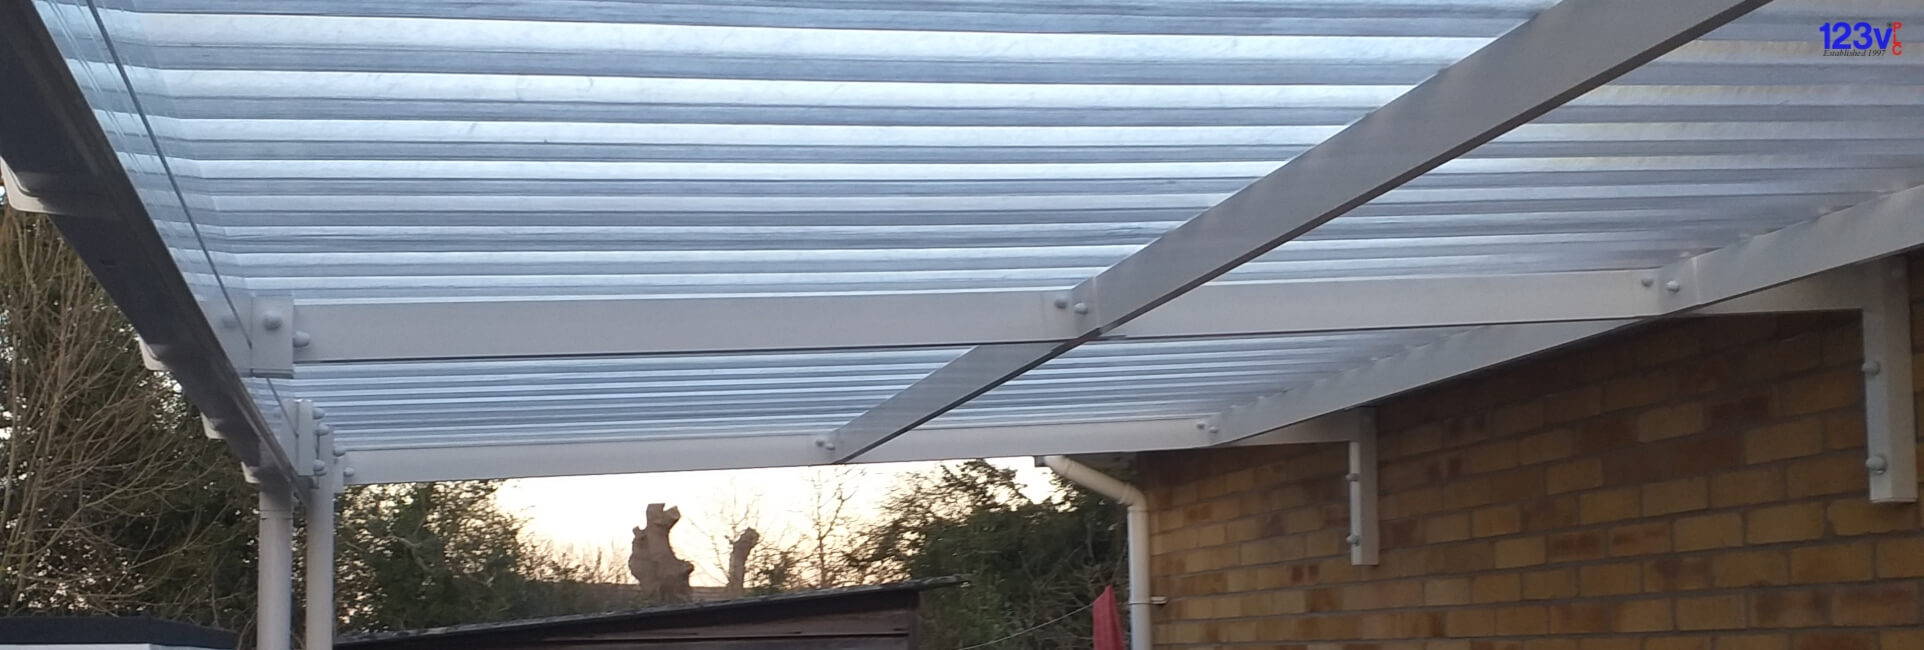 Traditional Economy Canopy in White by 123v